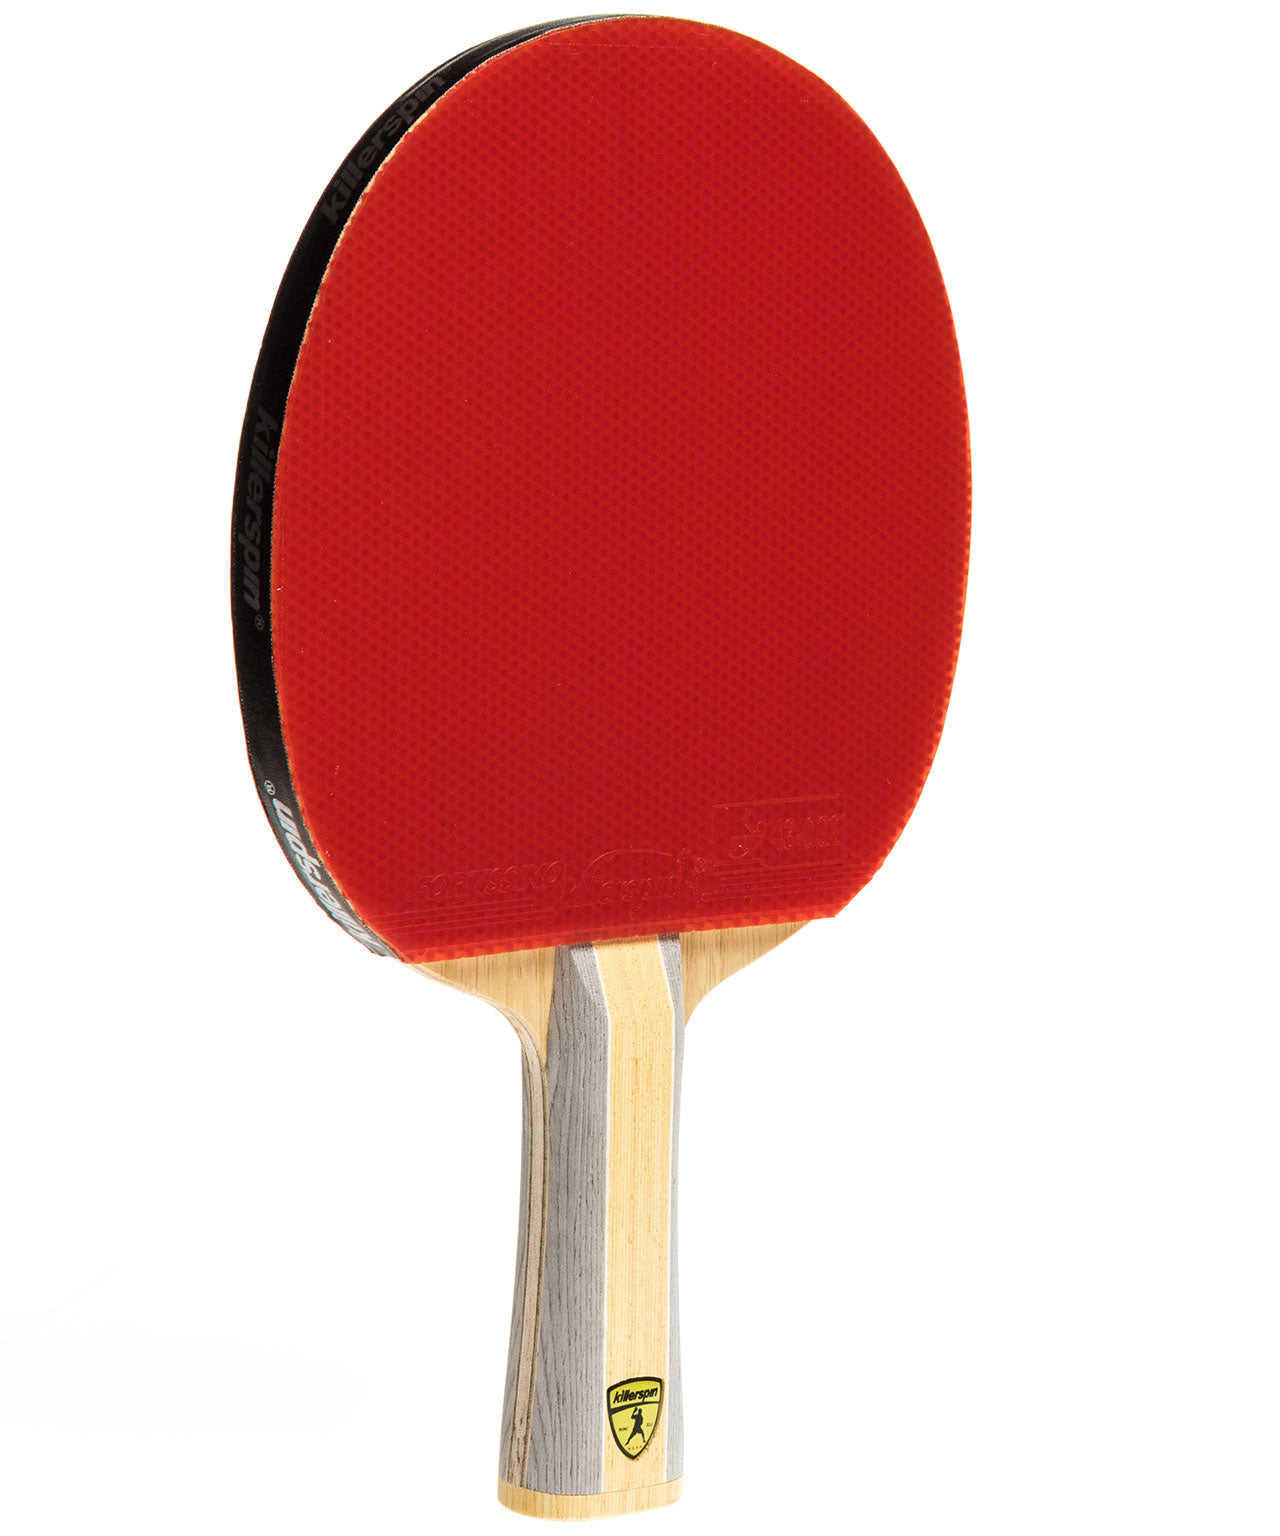 Killerspin Table Tennis Racket Diamond CQ Premium - Flared Red Fortissimo Rubber